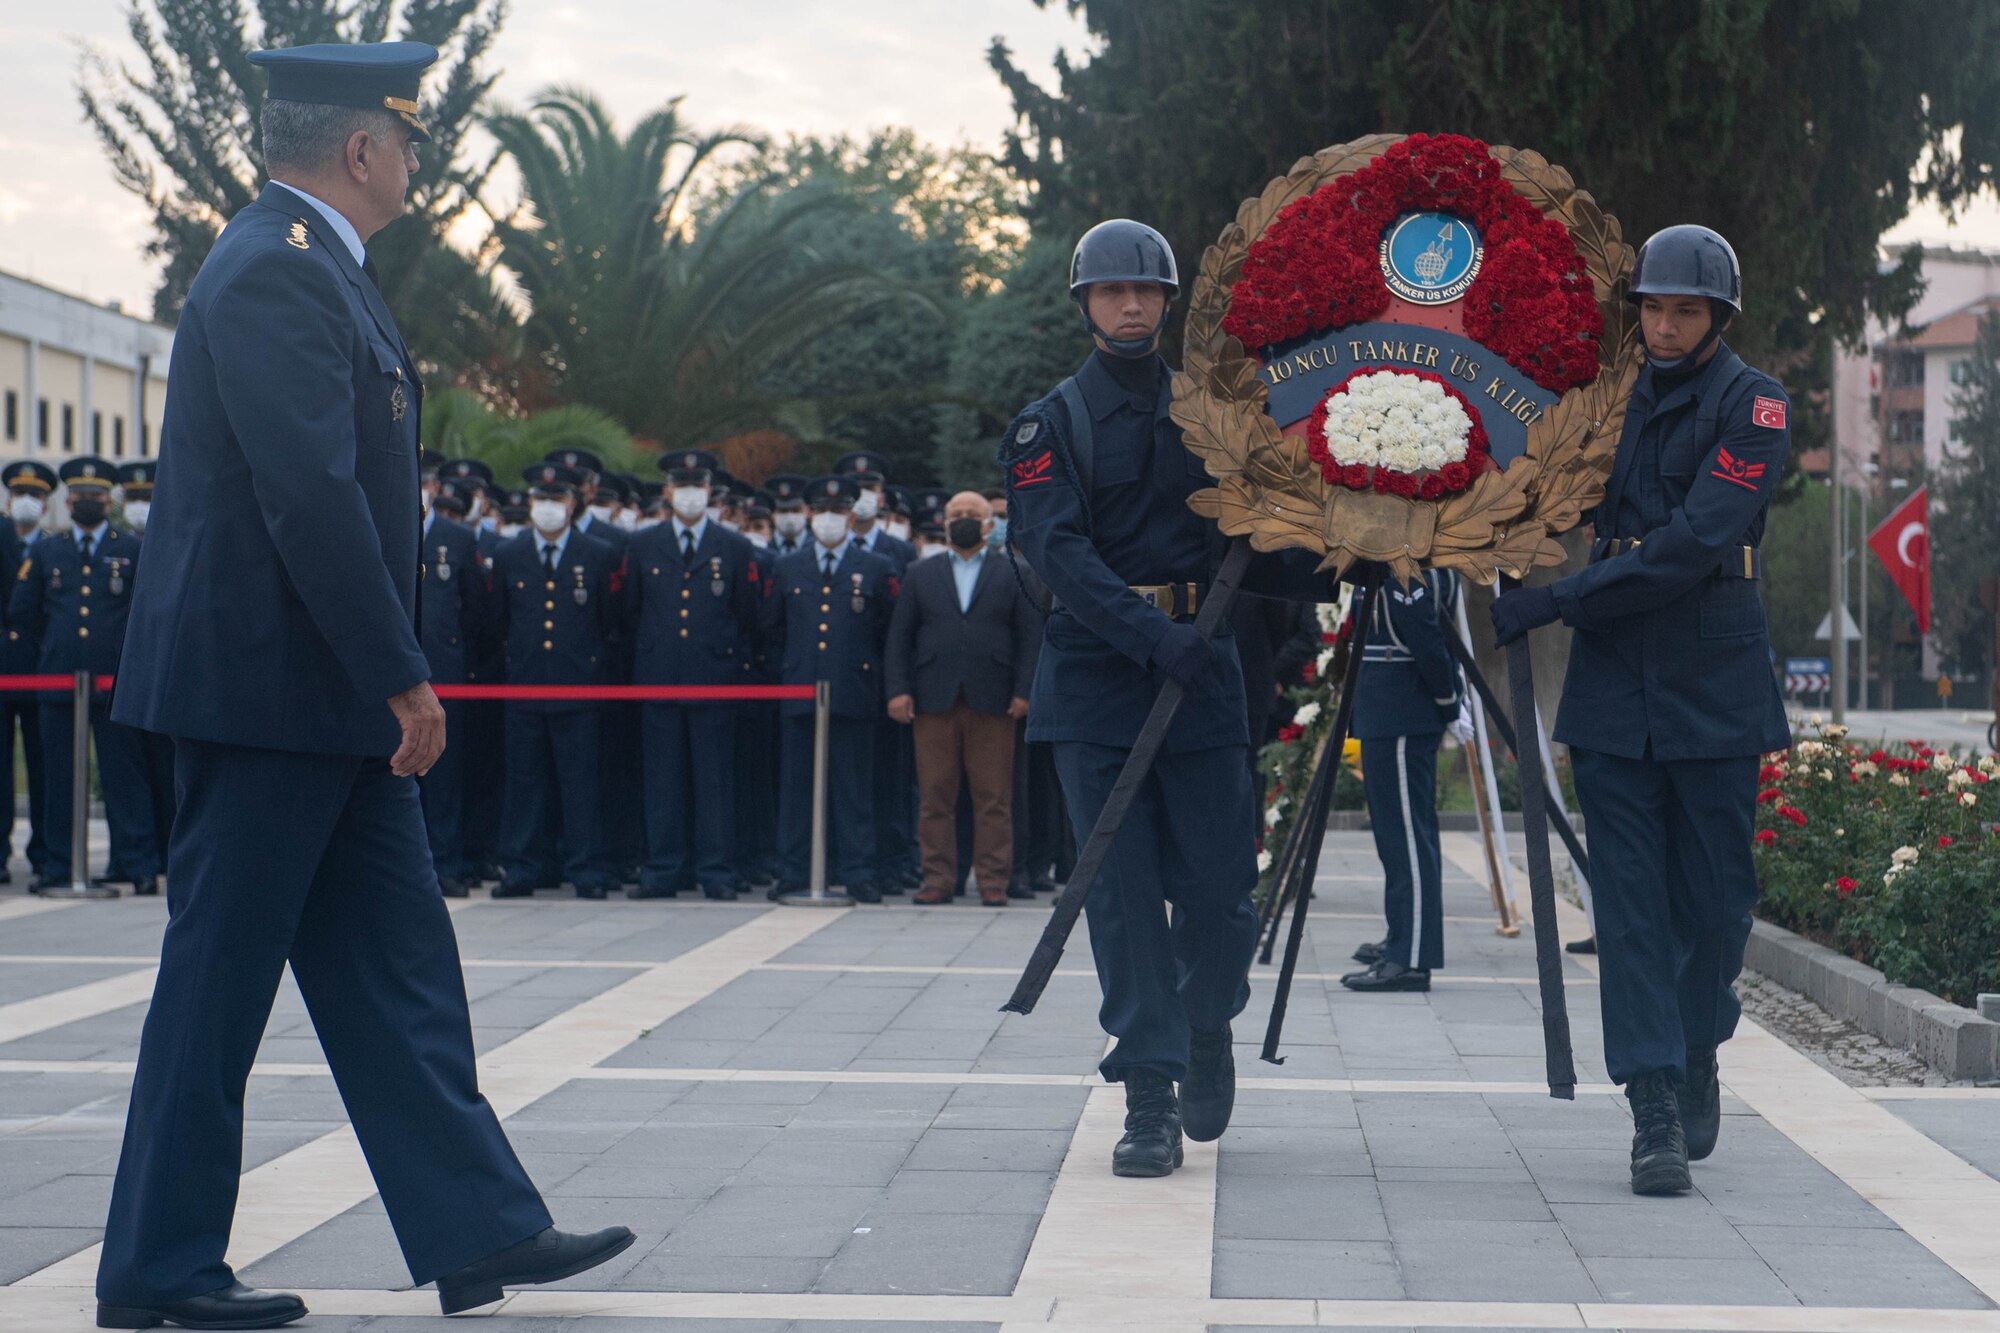 Turkish Air Force honor guardsmen carry a wreath during the Atatürk Memorial Day ceremony